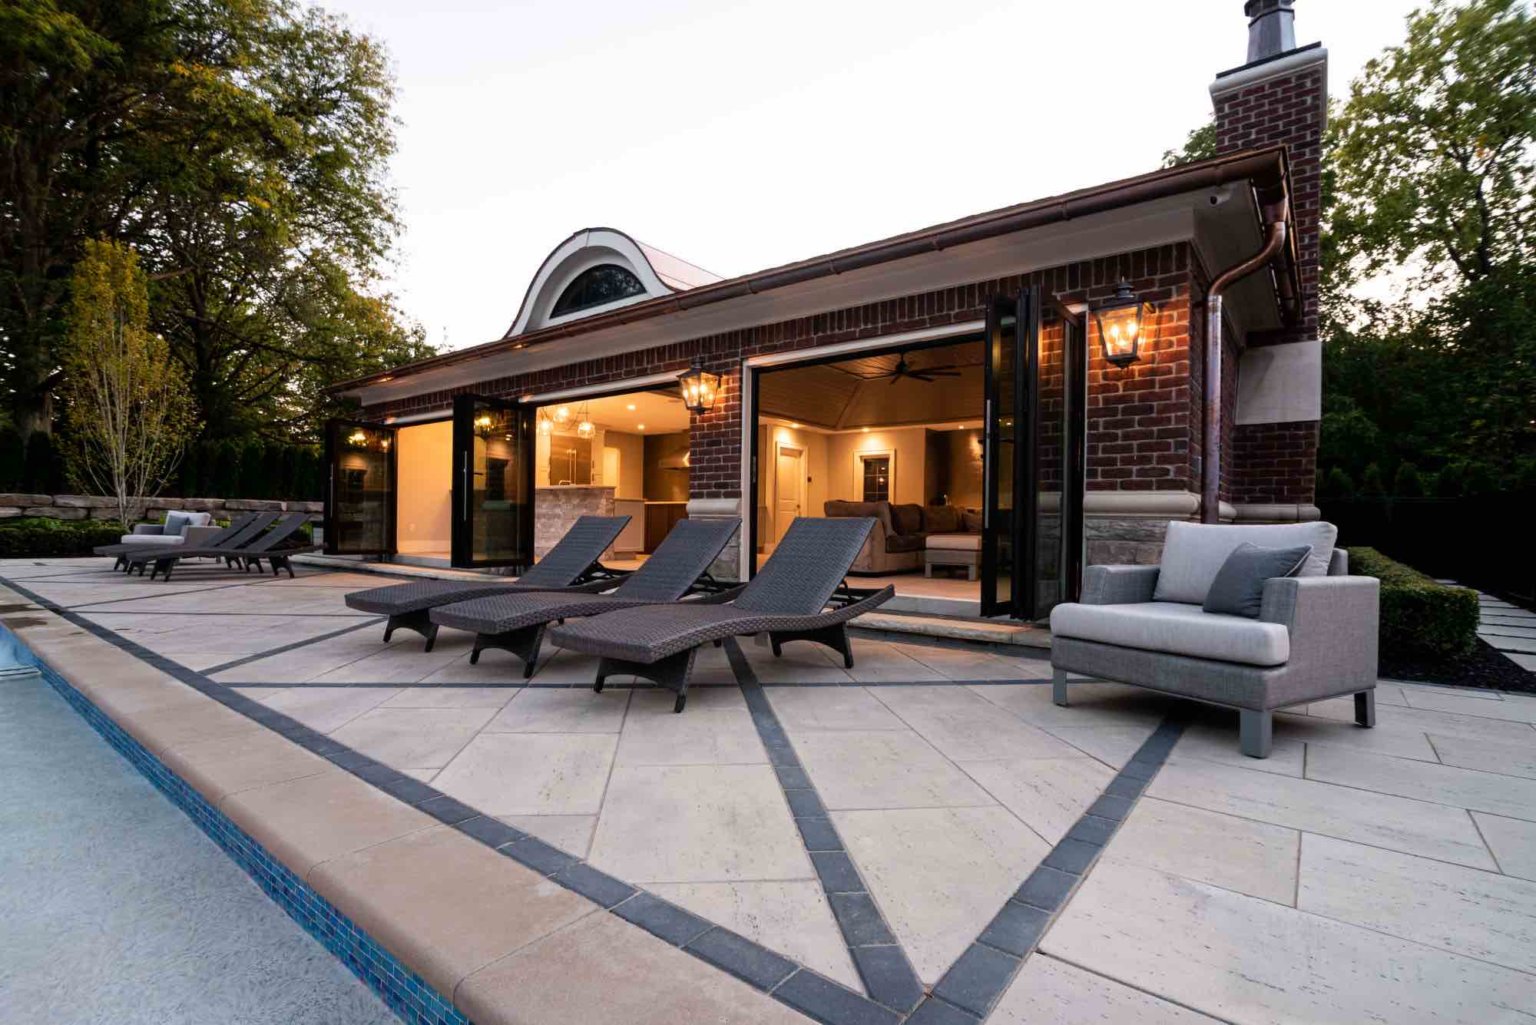 Pool House with Outdoor Kitchen in Bloomfield Hills MI, Michigan Pavers Paver Installation Michigan Paver Contractors in Michigan Best Pavers in Michigan Michigan Patio Pavers Driveway Pavers Michigan Walkway Pavers Michigan Michigan Paver Stones Custom Pavers Michigan Pool House Designs Pool House Plans Custom Pool House Construction Pool House Ideas Pool House Interior Pool House Decor outdoor kitchen, outdoor bar, outdoor kitchen ideas, patio ideas, patio design ideas, design outdoor kitchens, open kitchen, outdoor cooking, small backyard patio ideas, bbq grill, outdoor grill, bbq grills, built in grill, Antonelli Landscape, Antonelli Landscape pool spa